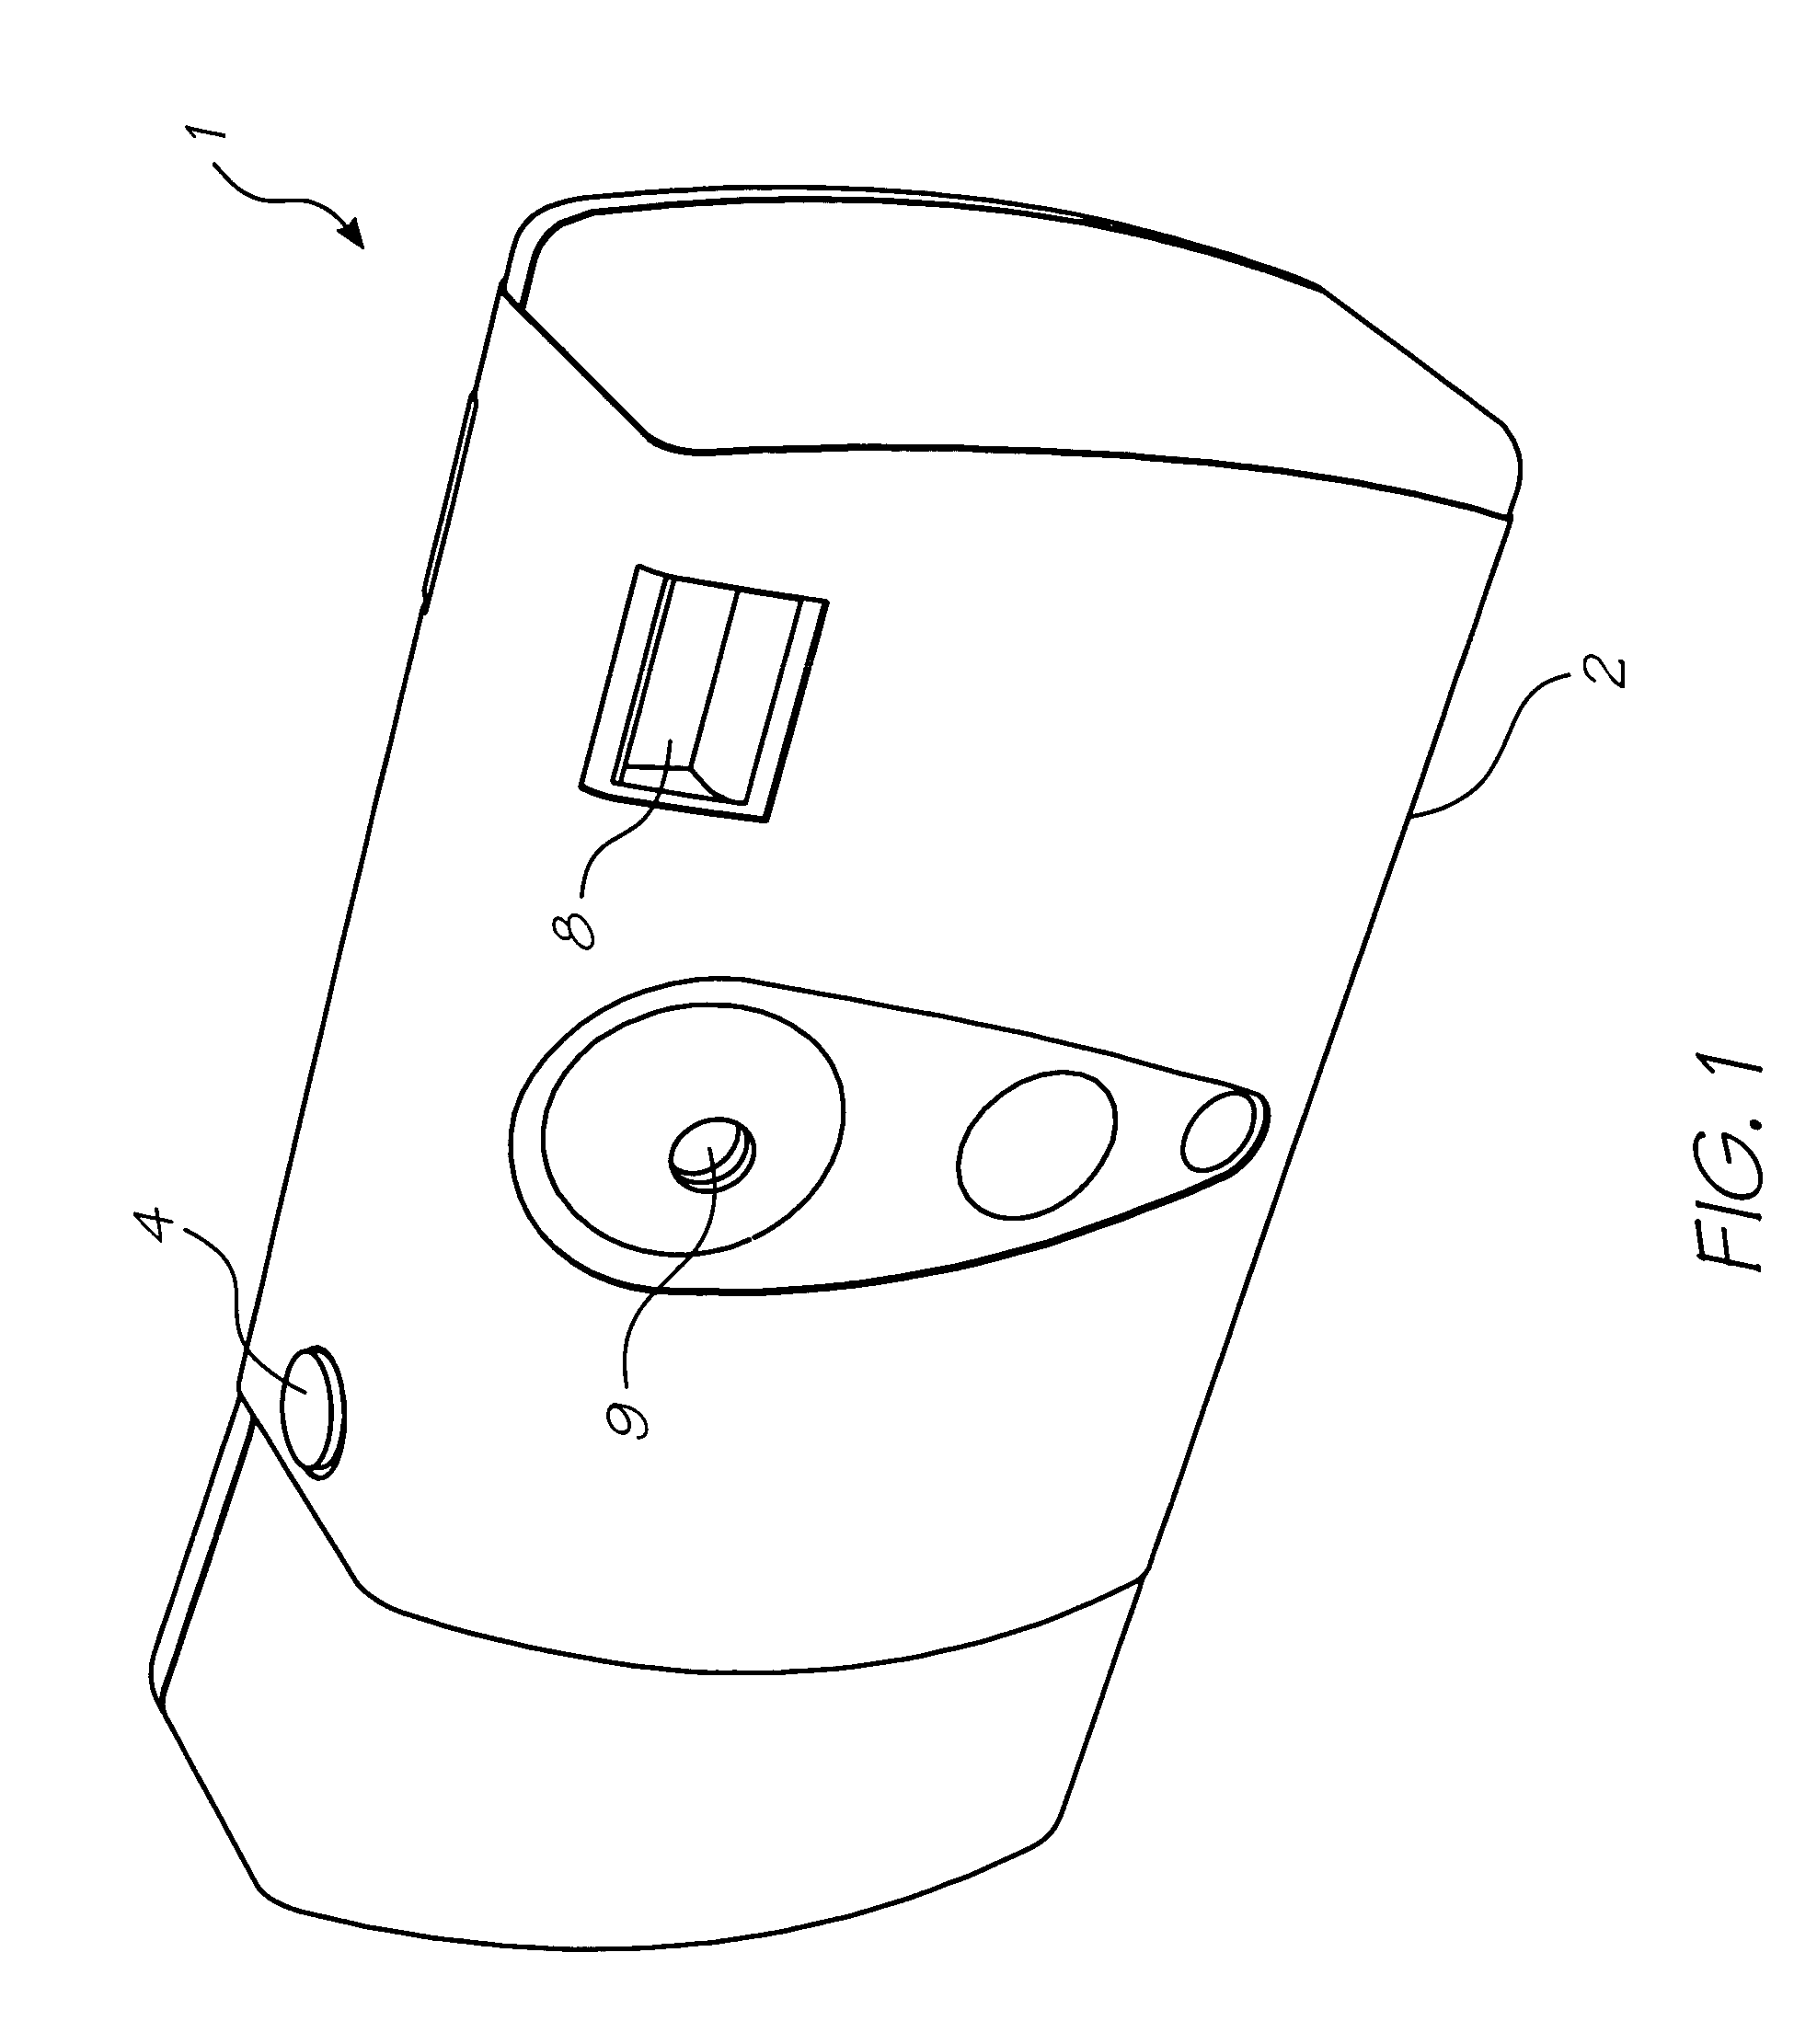 Printing cartridge for a camera and printer combination including an authentication device